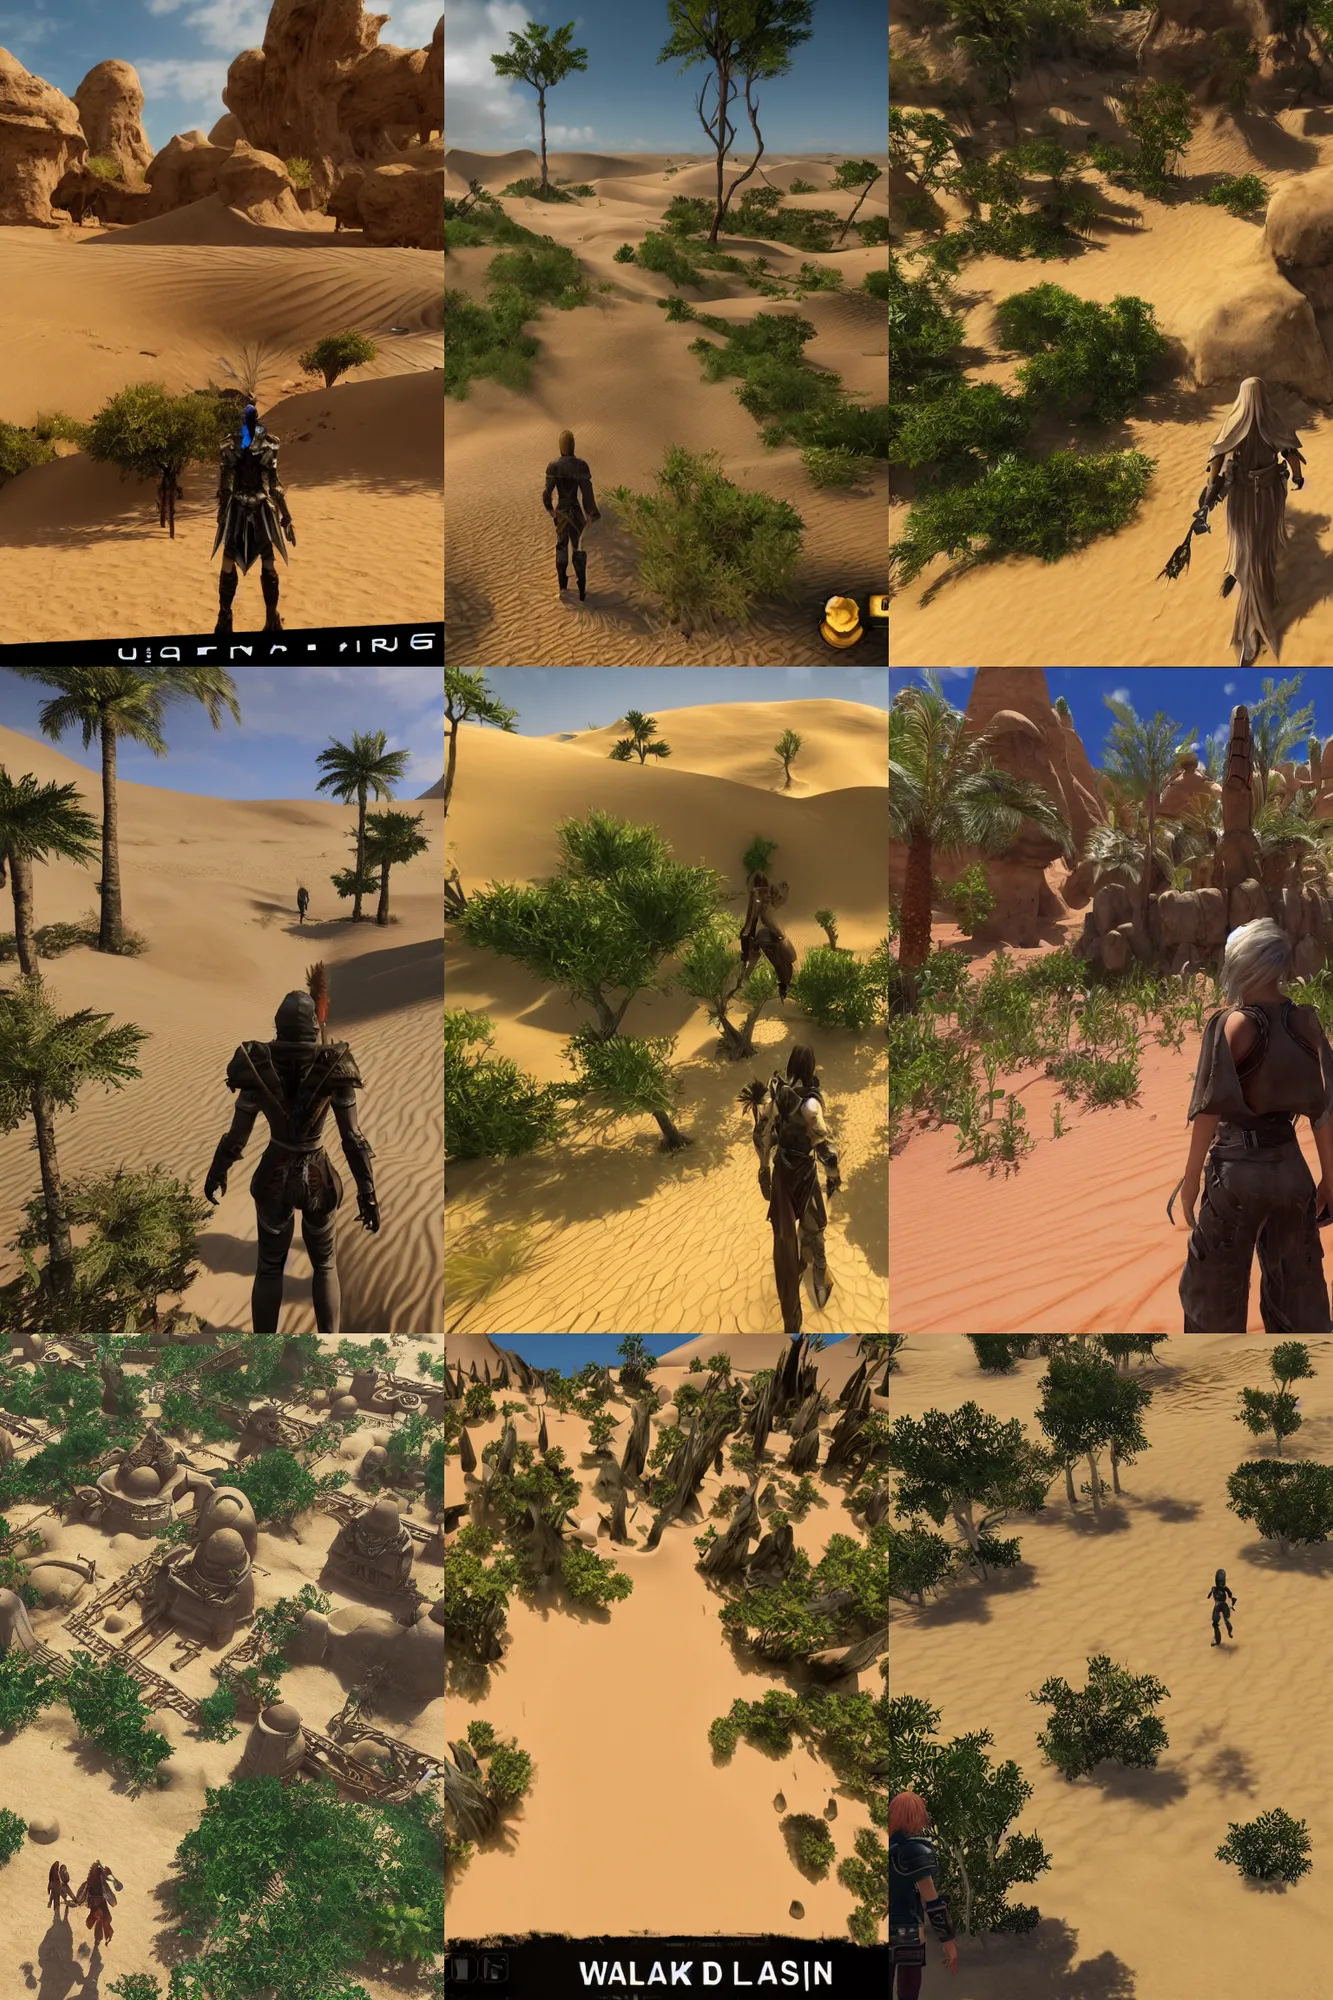 Prompt: gameplay walkthrough 3 rd person adventure game arriving at the amazing spiritual alien village in the lush oasis of a vast flat empty sand desert with dunes, screenshot, final fantasy, square enix, jrpg, unreal engine, next gen graphics, rtx, cutscene, path tracing, high fidelity, particle effects